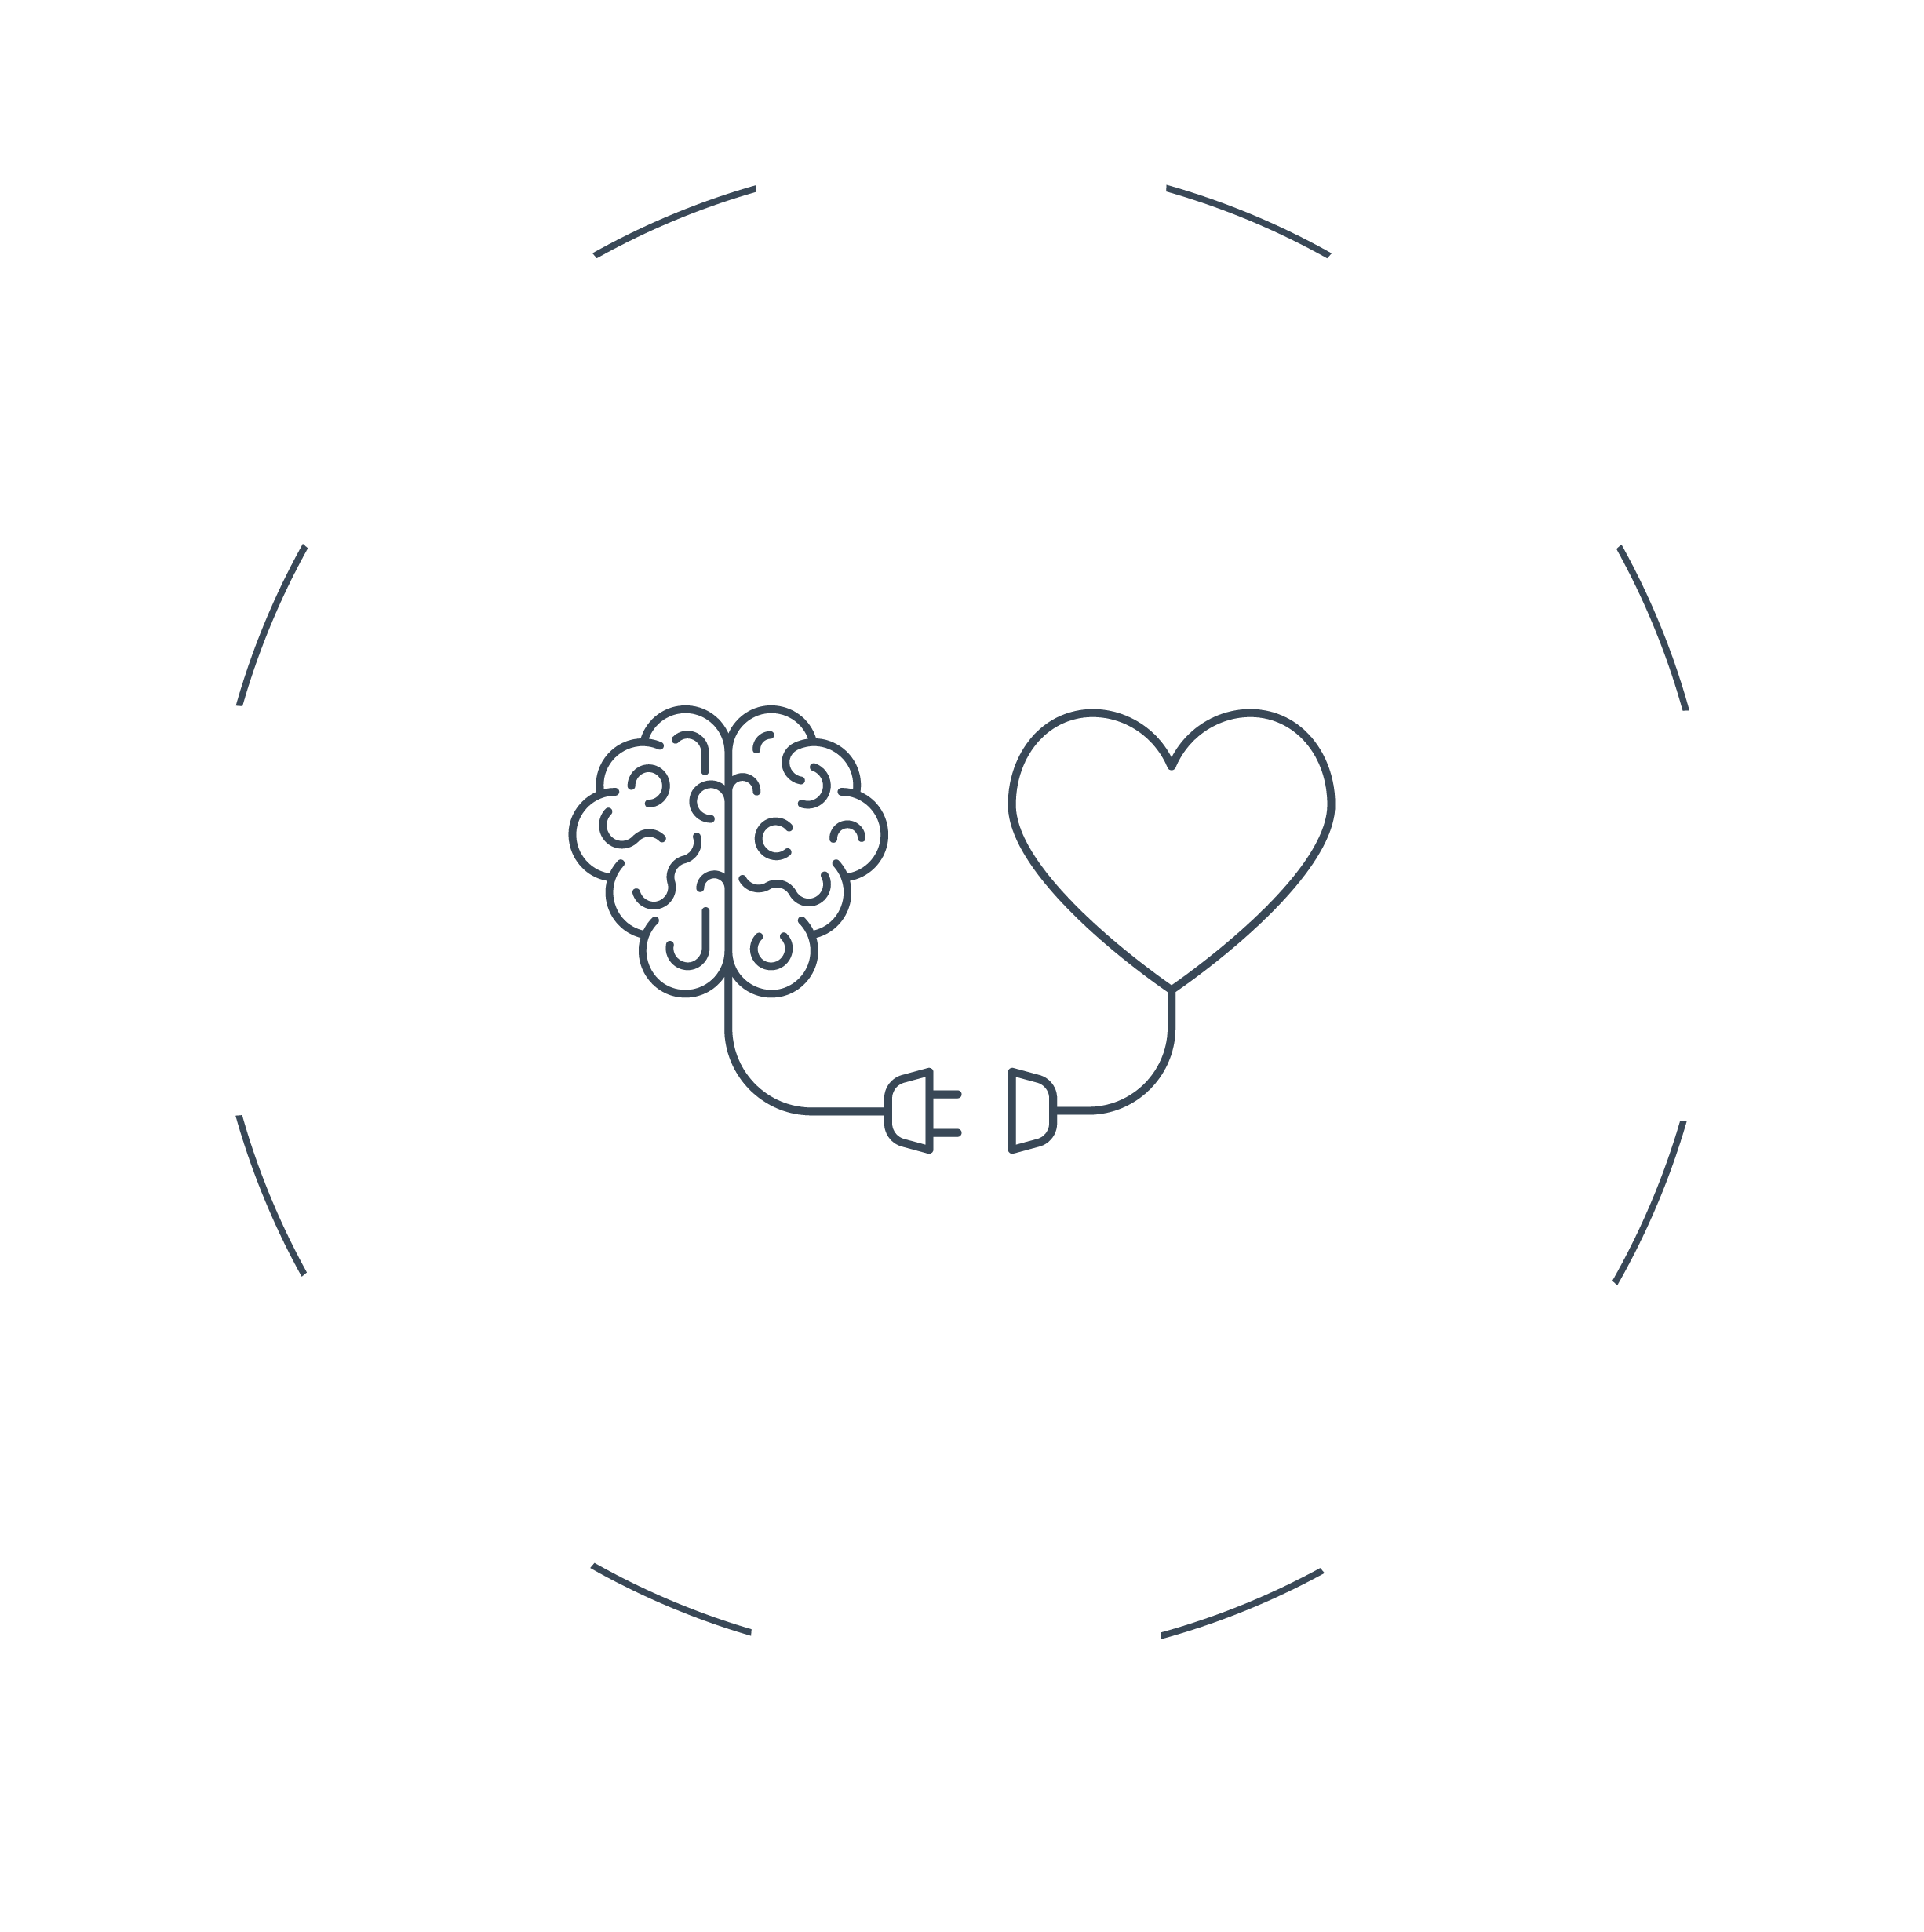 Graphic showing various marketing channels: radio, websites, social media, streaming, on-demand, podcasts, newsletters, and events.